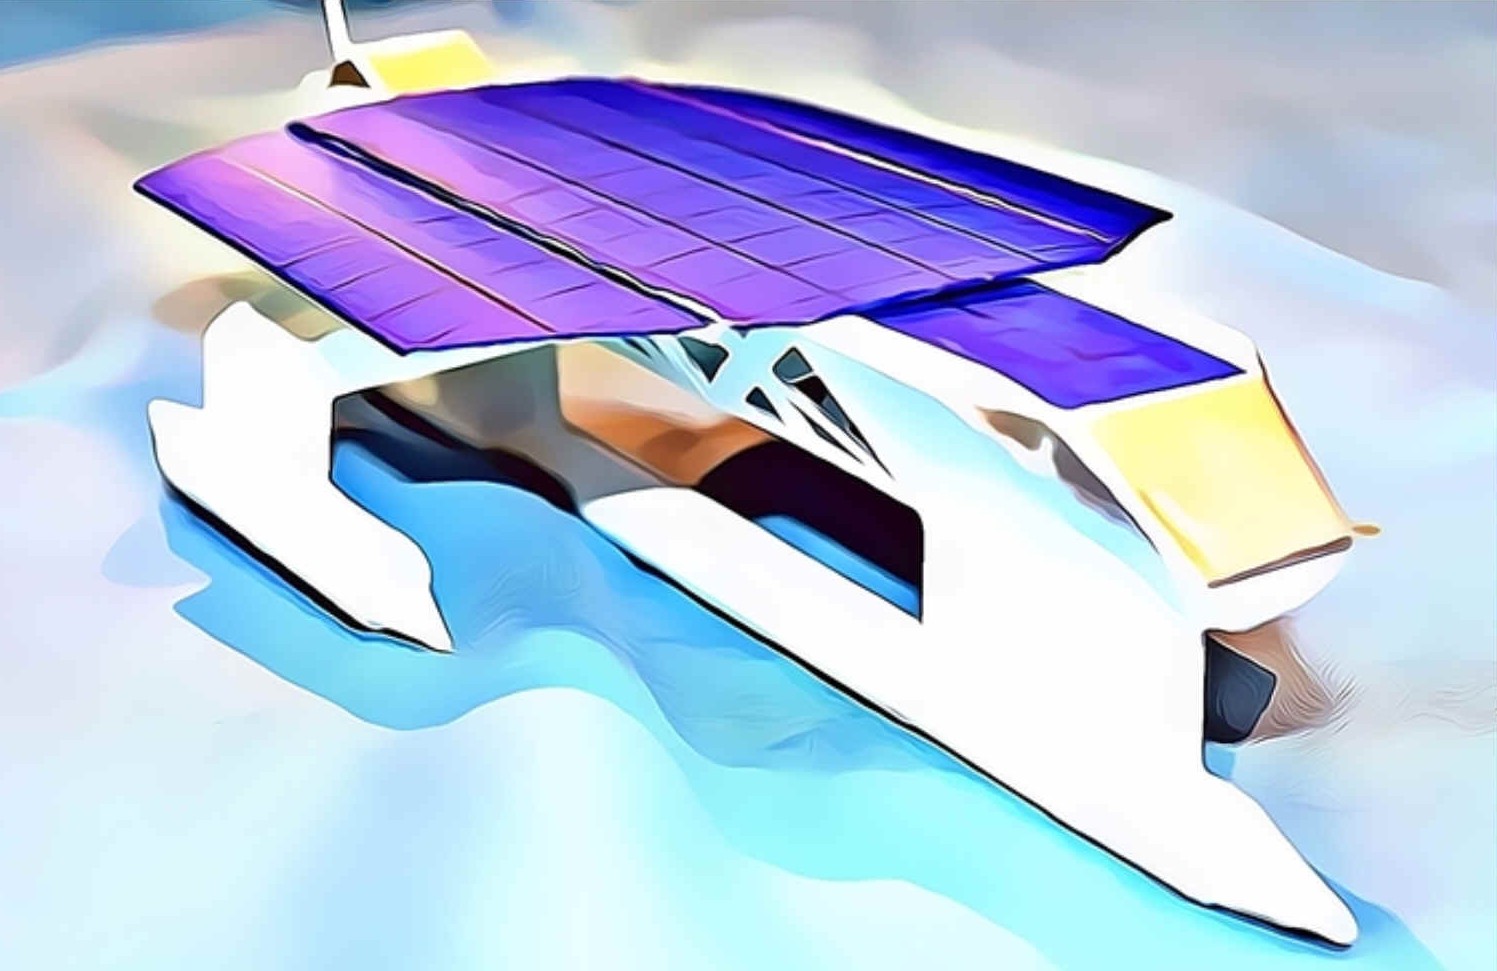 Probably the world's fastest solar powered autonomous boat